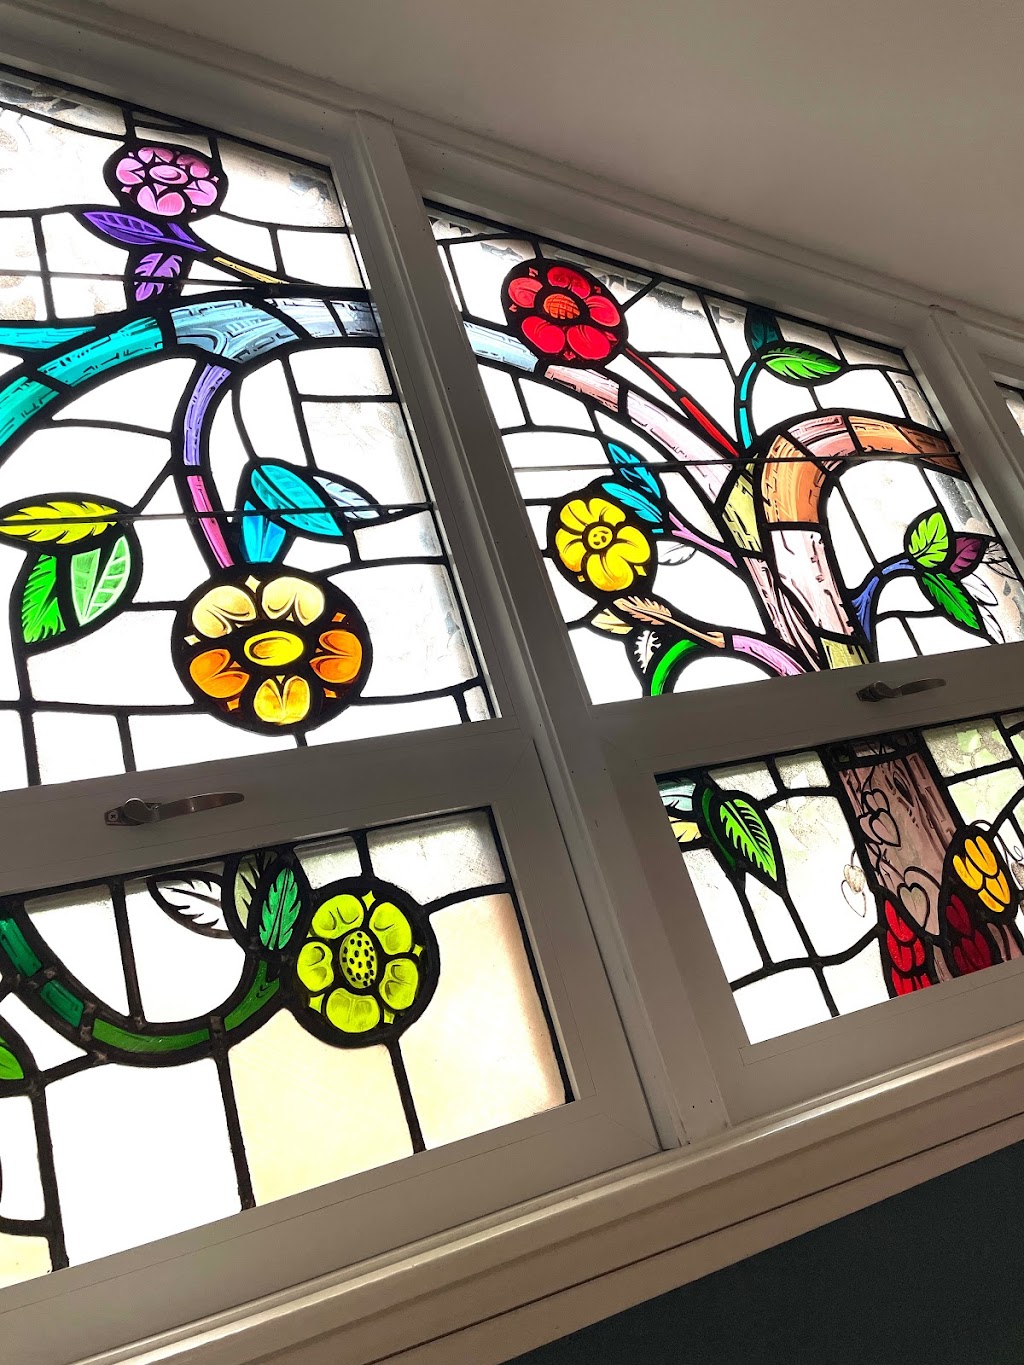 Scintilla Stained Glass | 77 N Chapman Rd, Doylestown, PA 18901 | Phone: (215) 348-4880